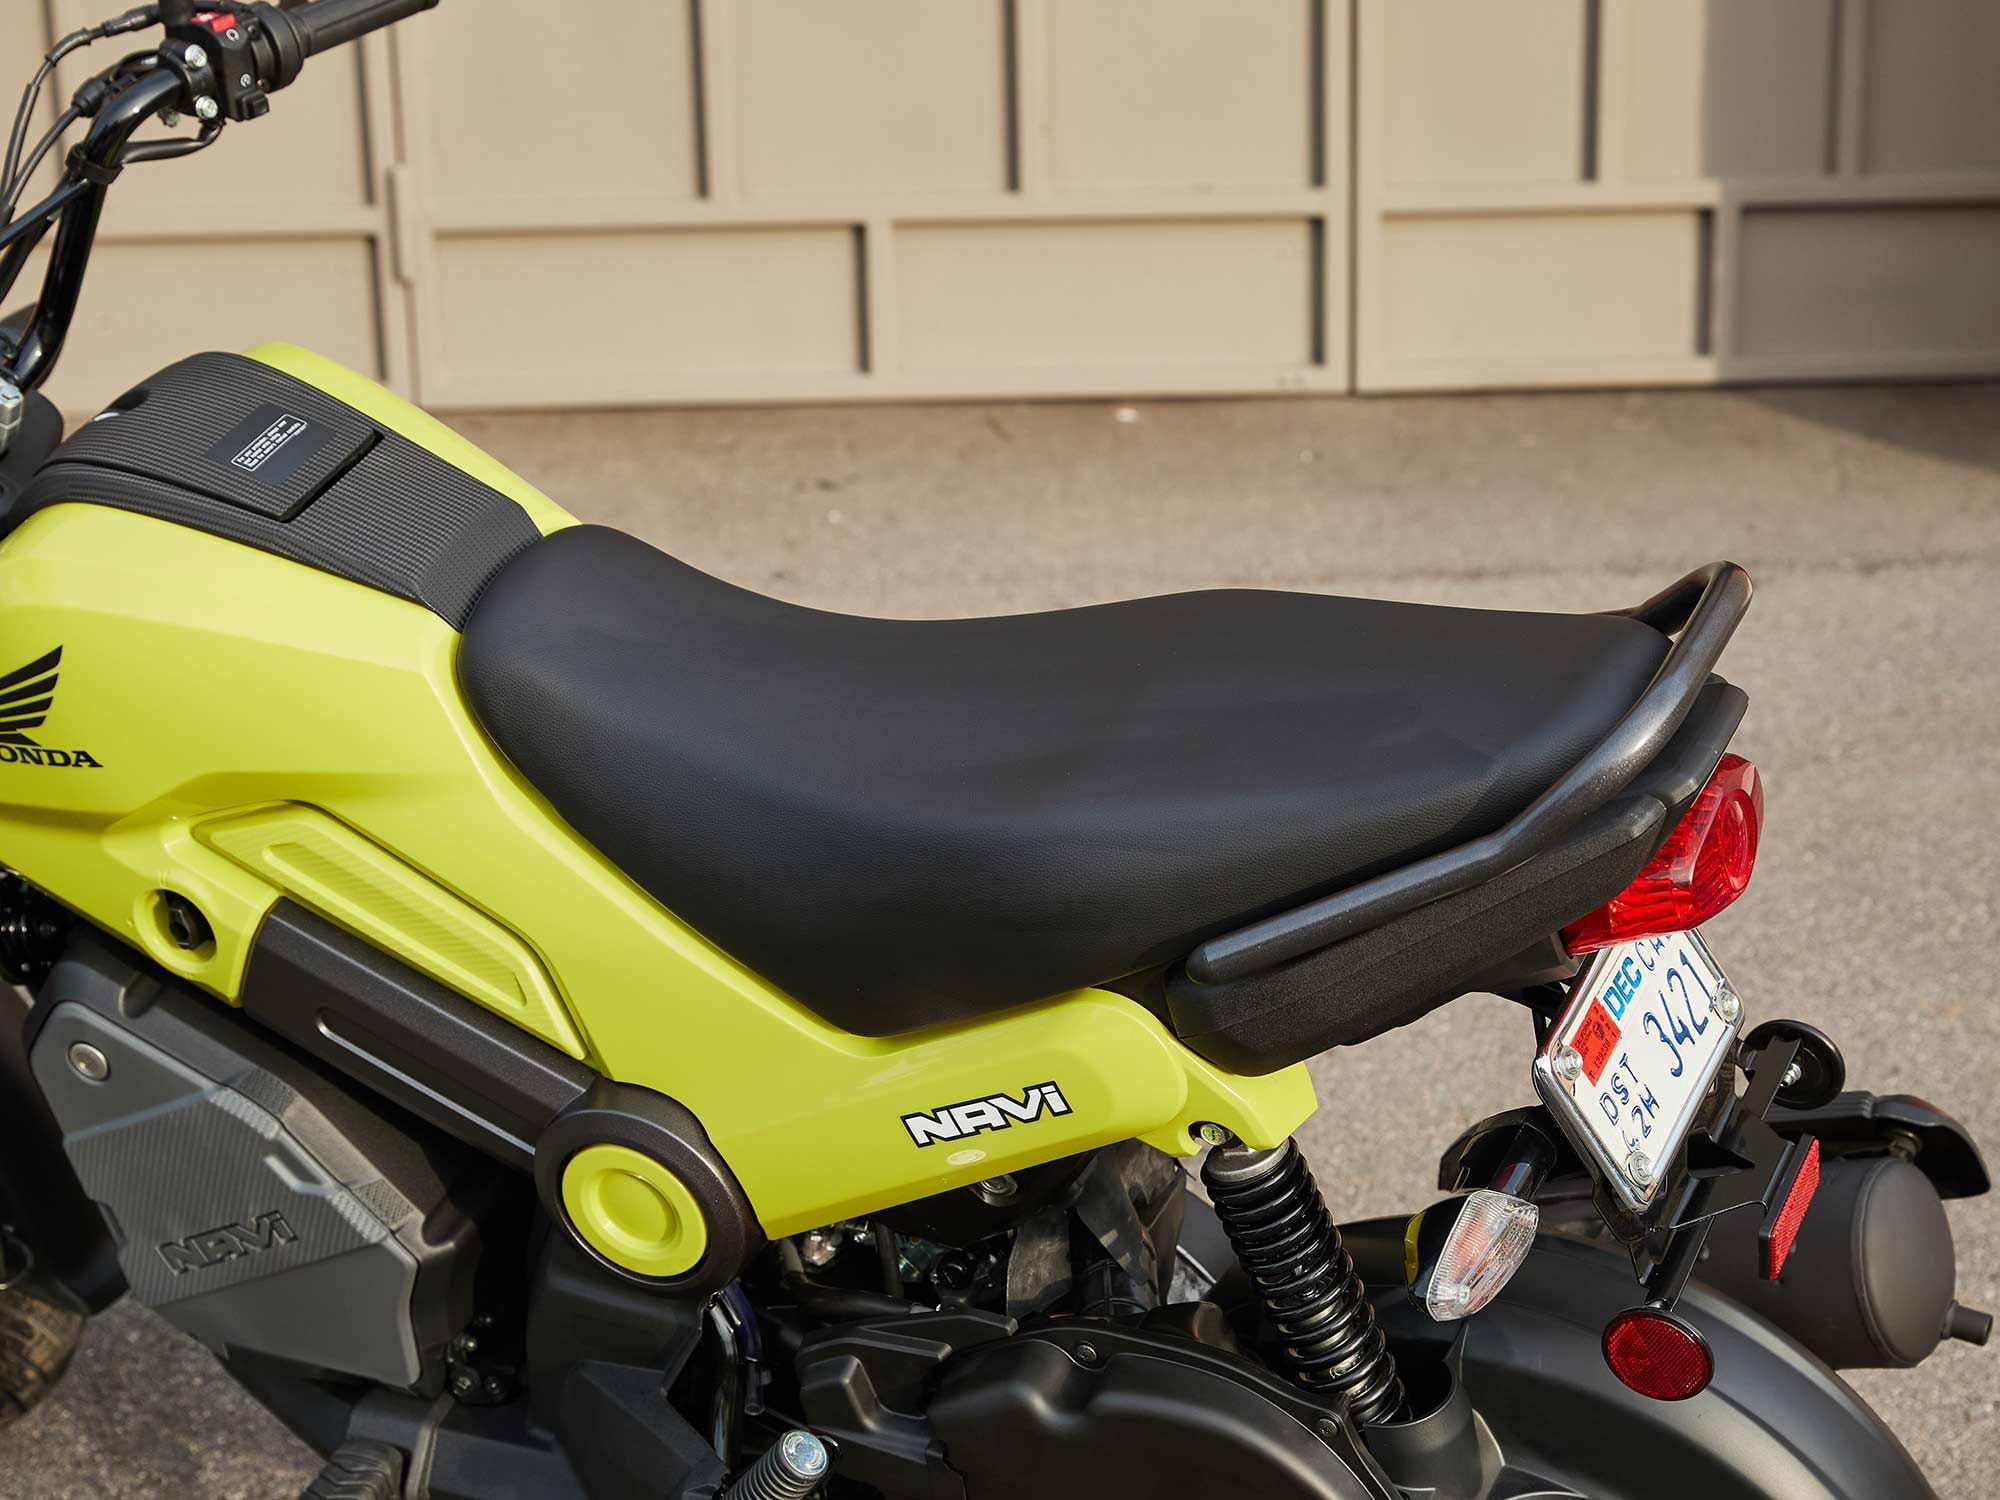 The Navi’s saddle is comfy enough for two, and the single shock does an adequate job of absorbing minor pavement irregularities. The keyed panel behind the steering head accesses the 0.9-gallon fuel tank; note the fuel petcock (remember those?) just above the storage bin.